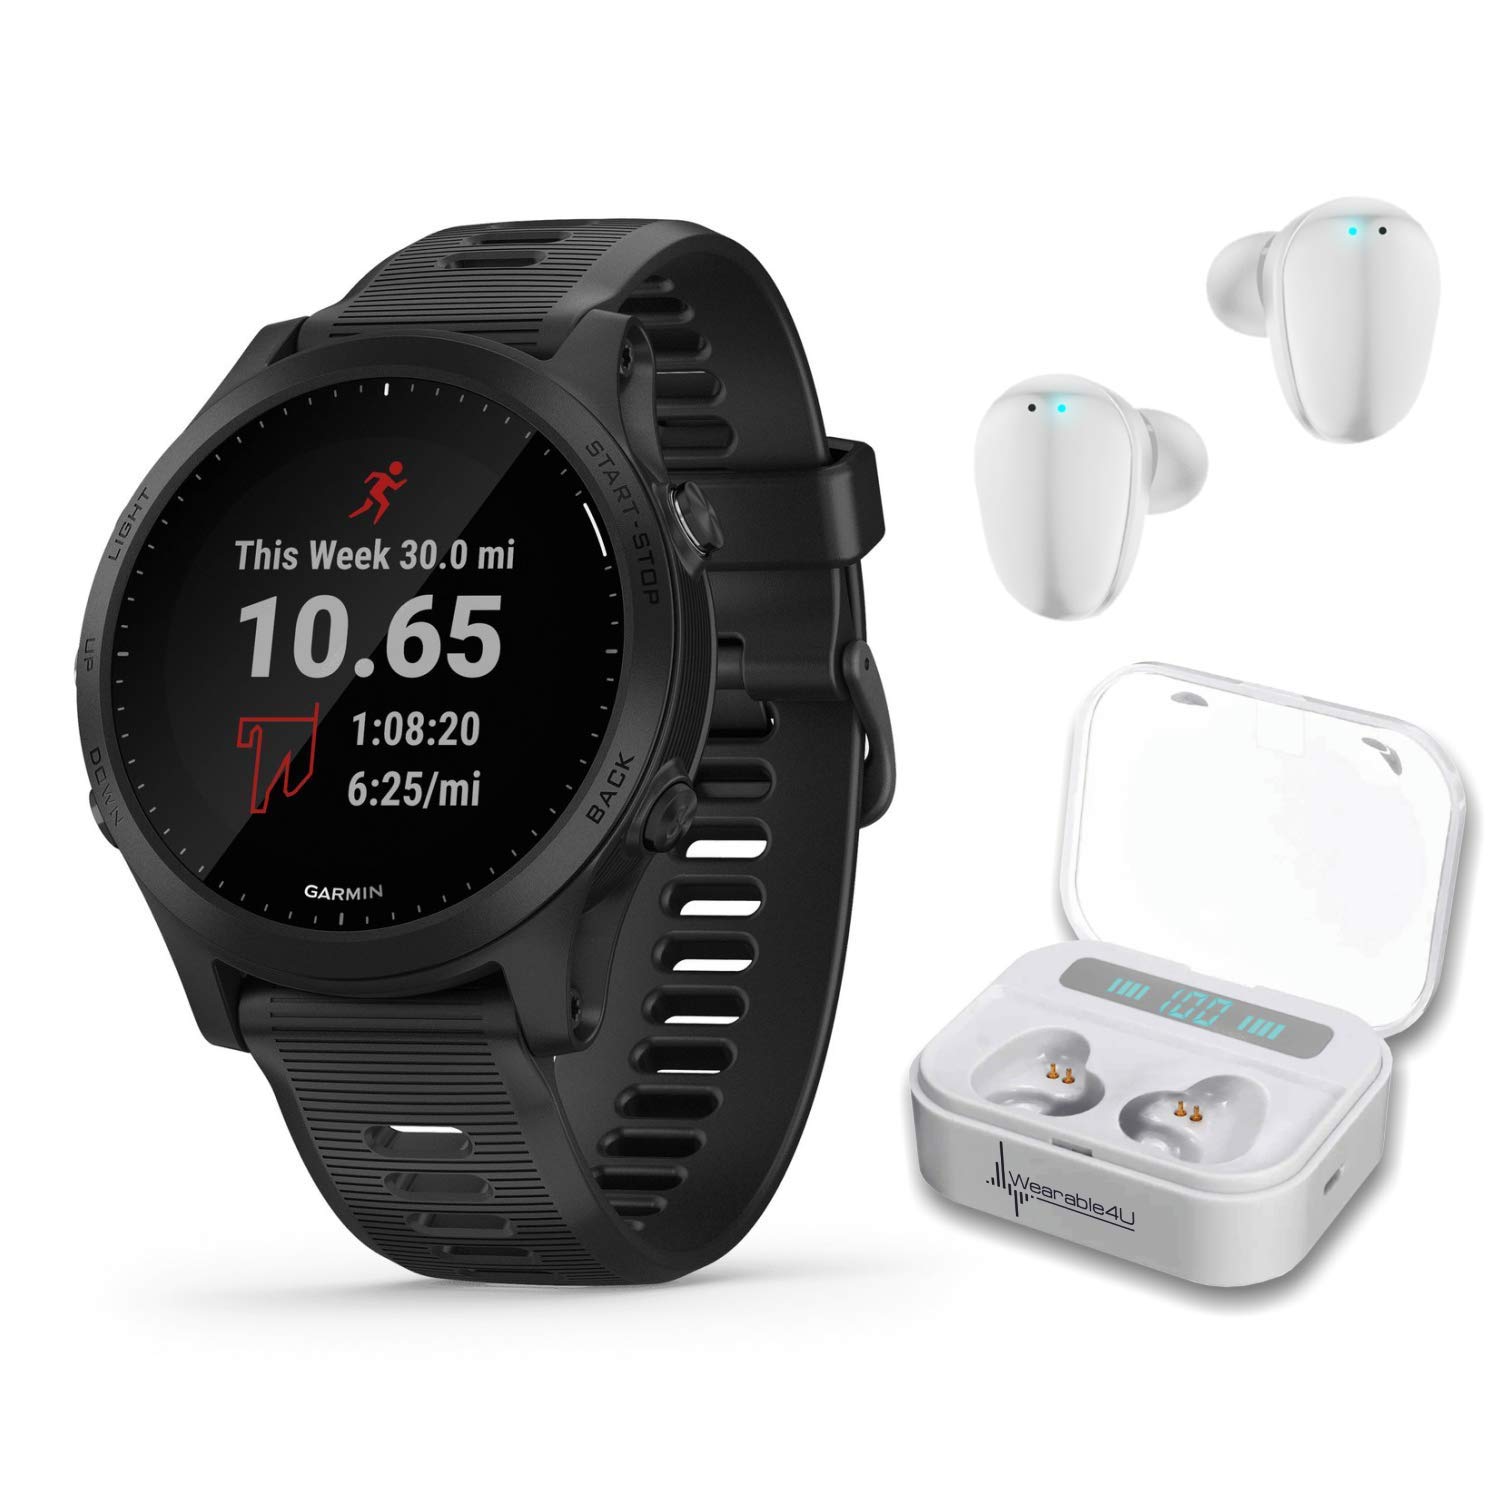 Wearable4U Garmin Forerunner 945 Premium GPS Running/Triathlon Smartwatch with Included Ultimate White Earbuds with Charging E-Bank Case Bundle